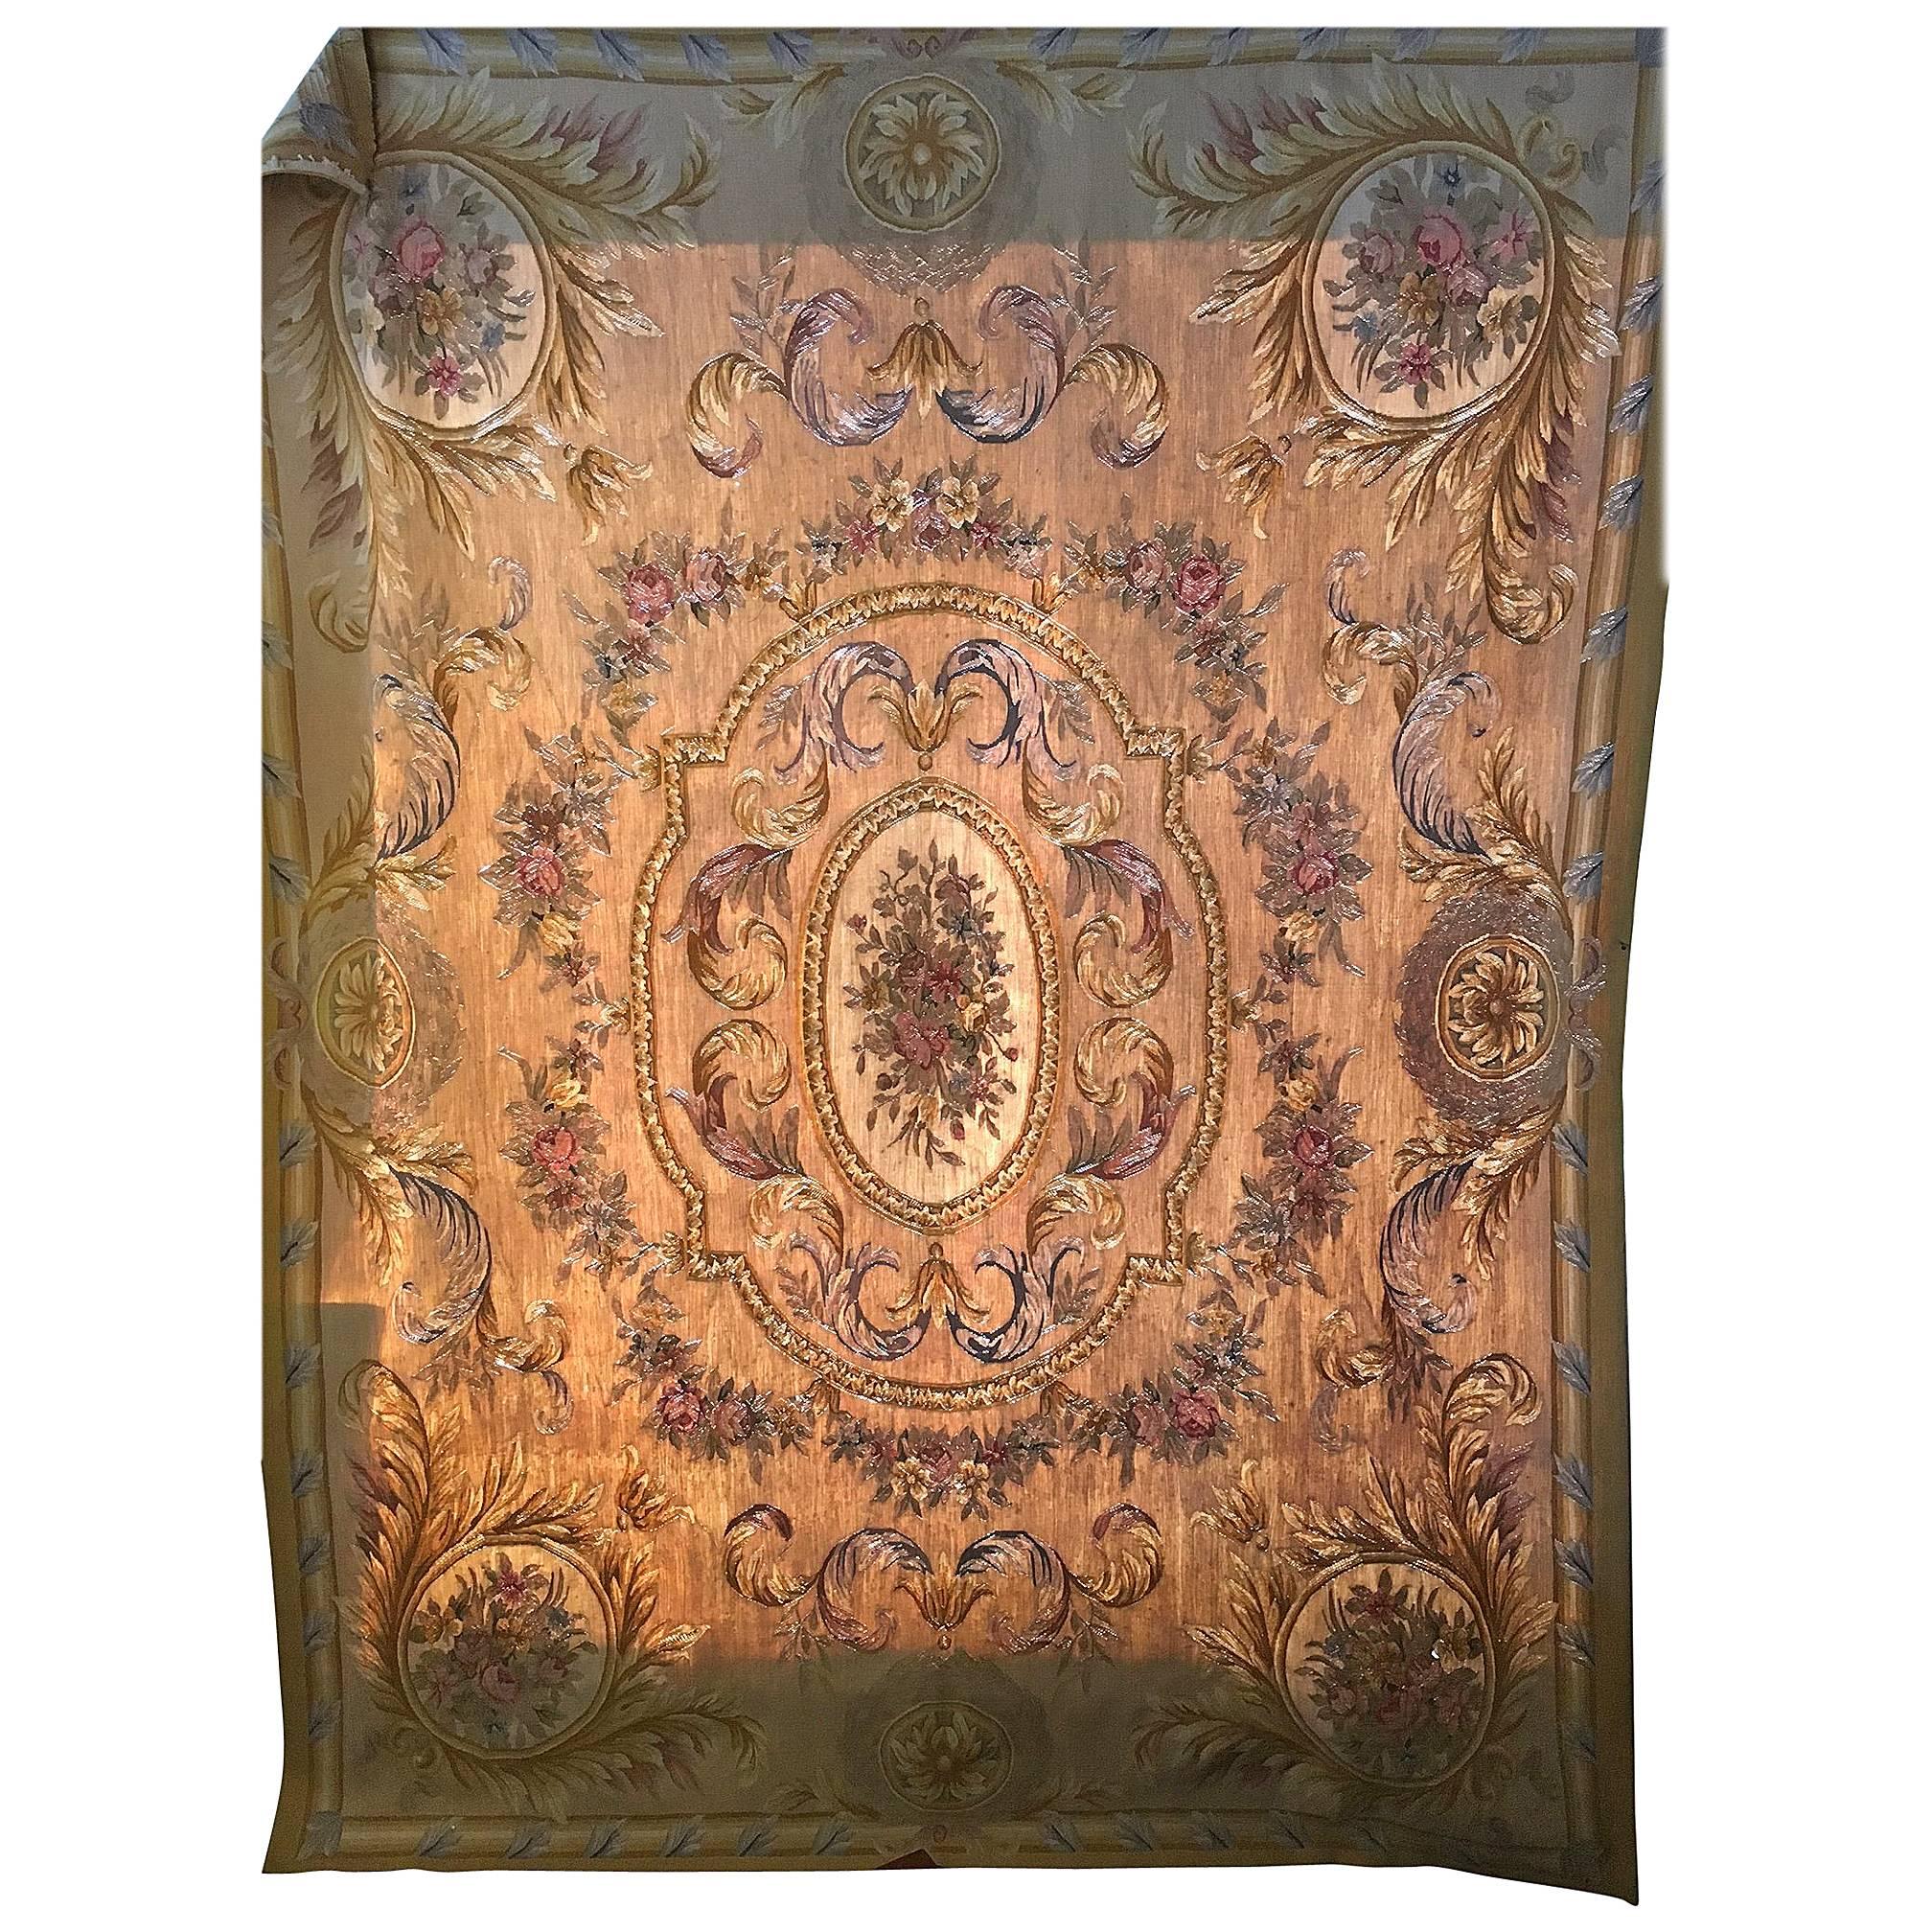 Fine and Very Decorative Aubusson Carpet or Throw